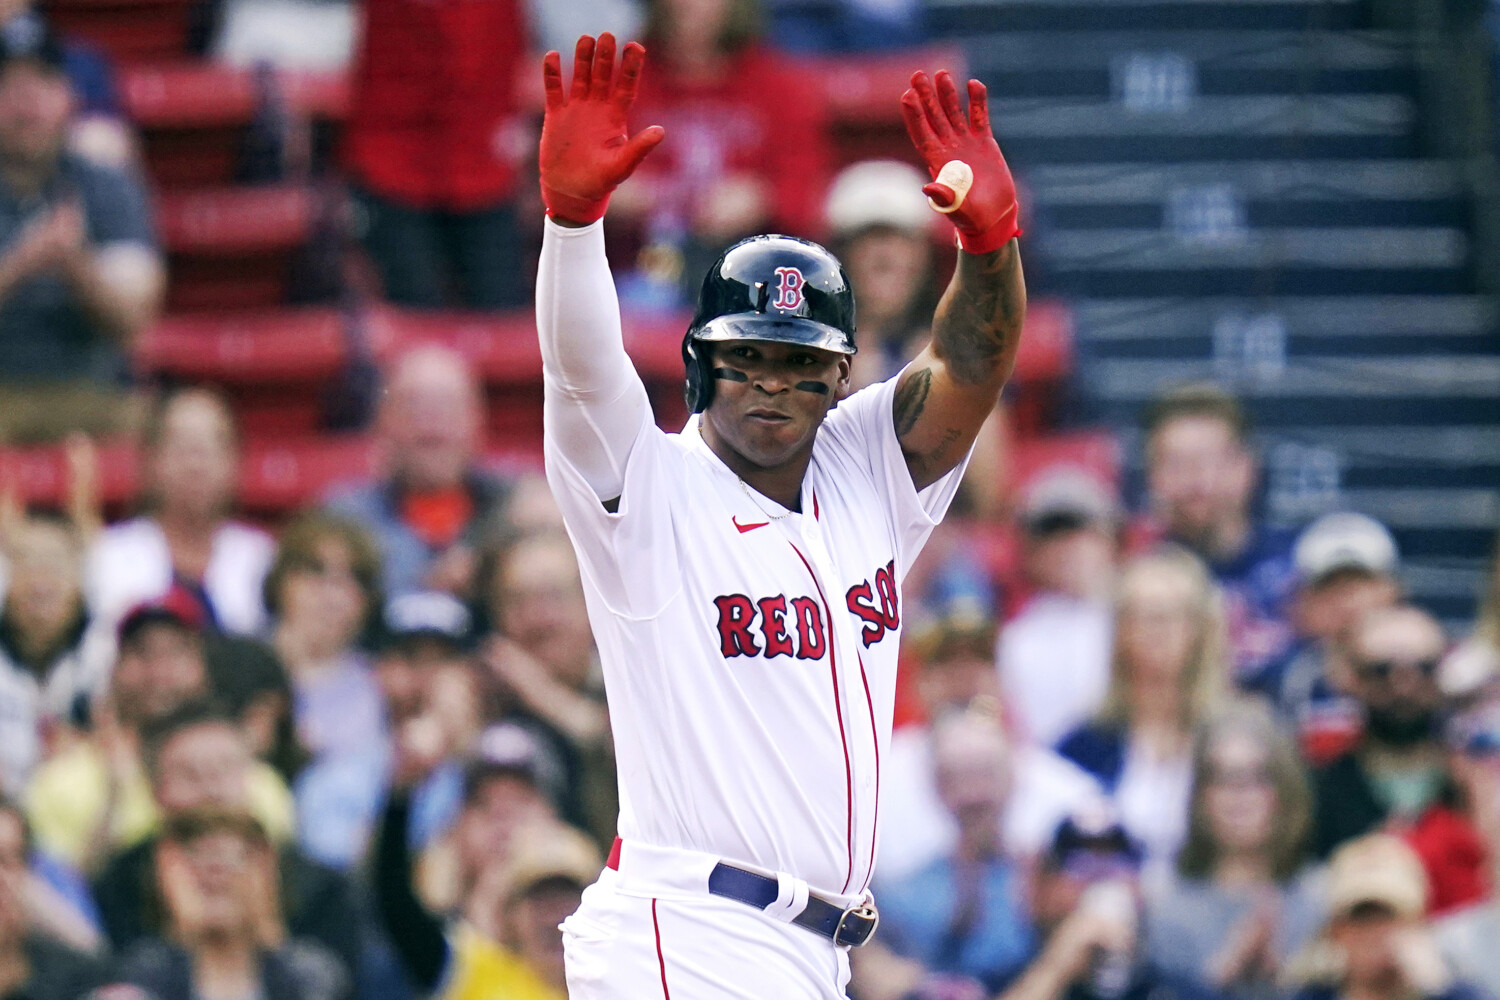 RED SOX NOTEBOOK: Ortiz back at first base